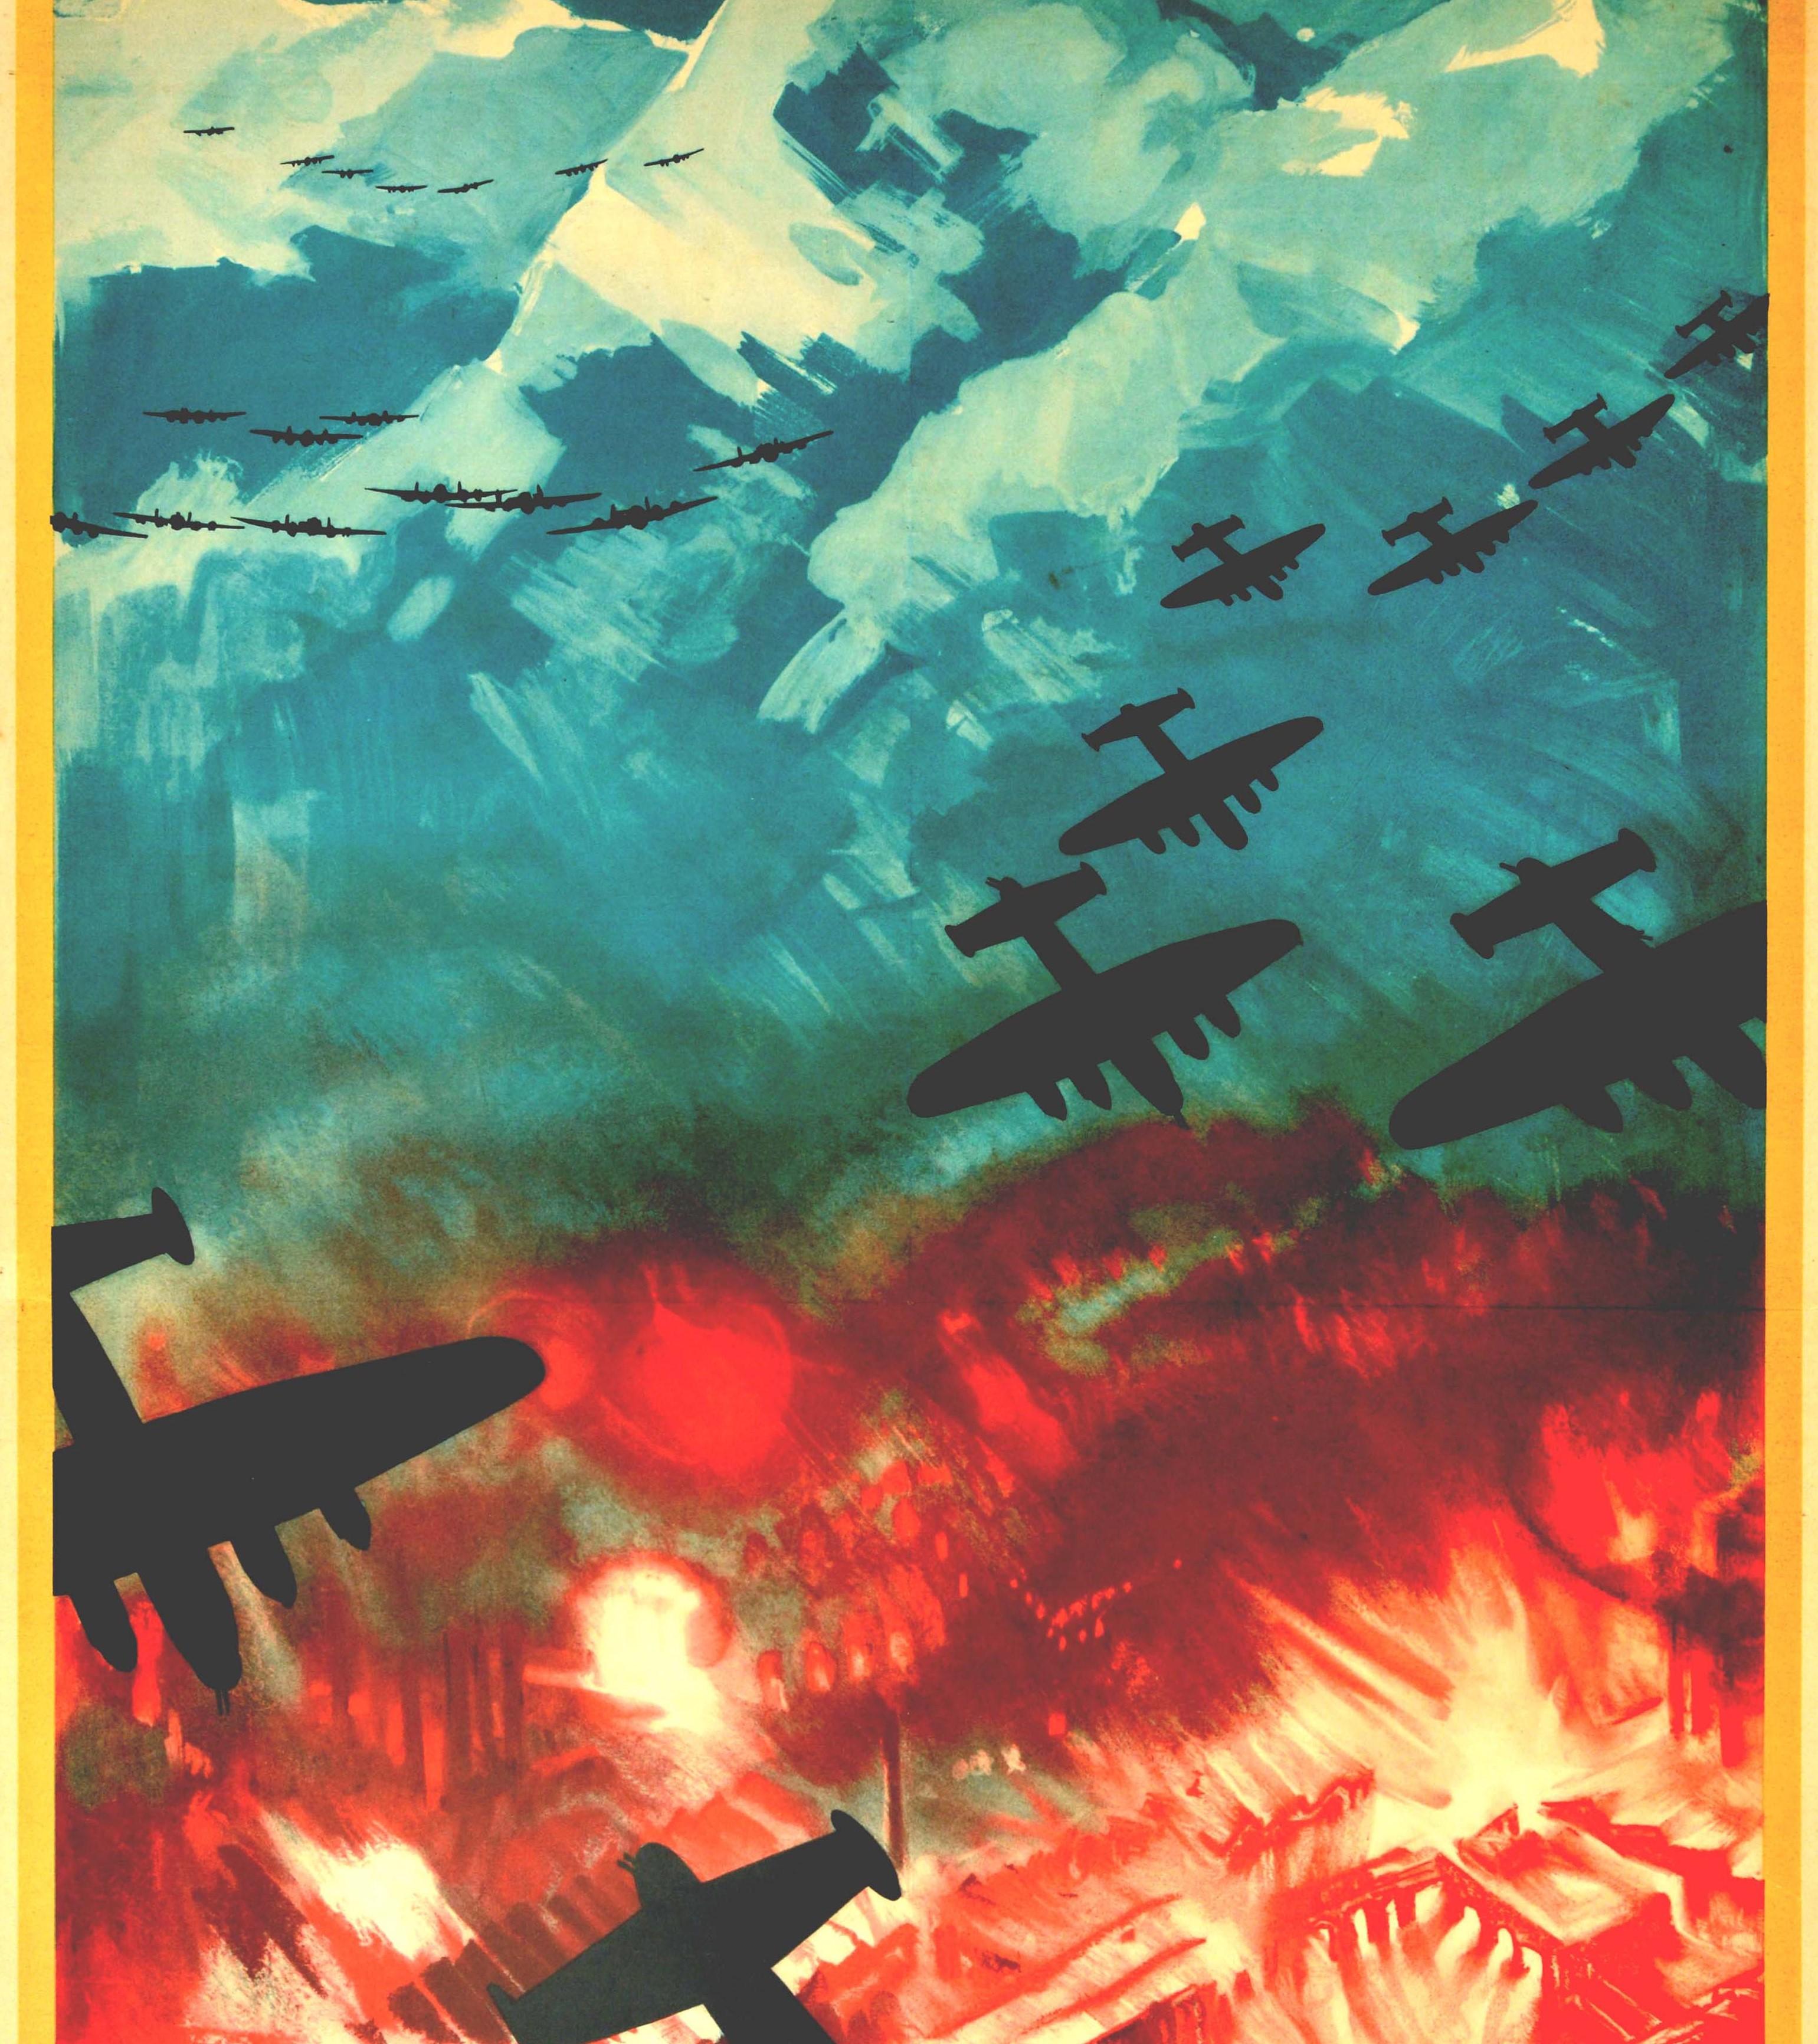 Original Vintage Poster WWII Defender Of Freedom RAF Bombers Italian Alps Planes - Print by Unknown